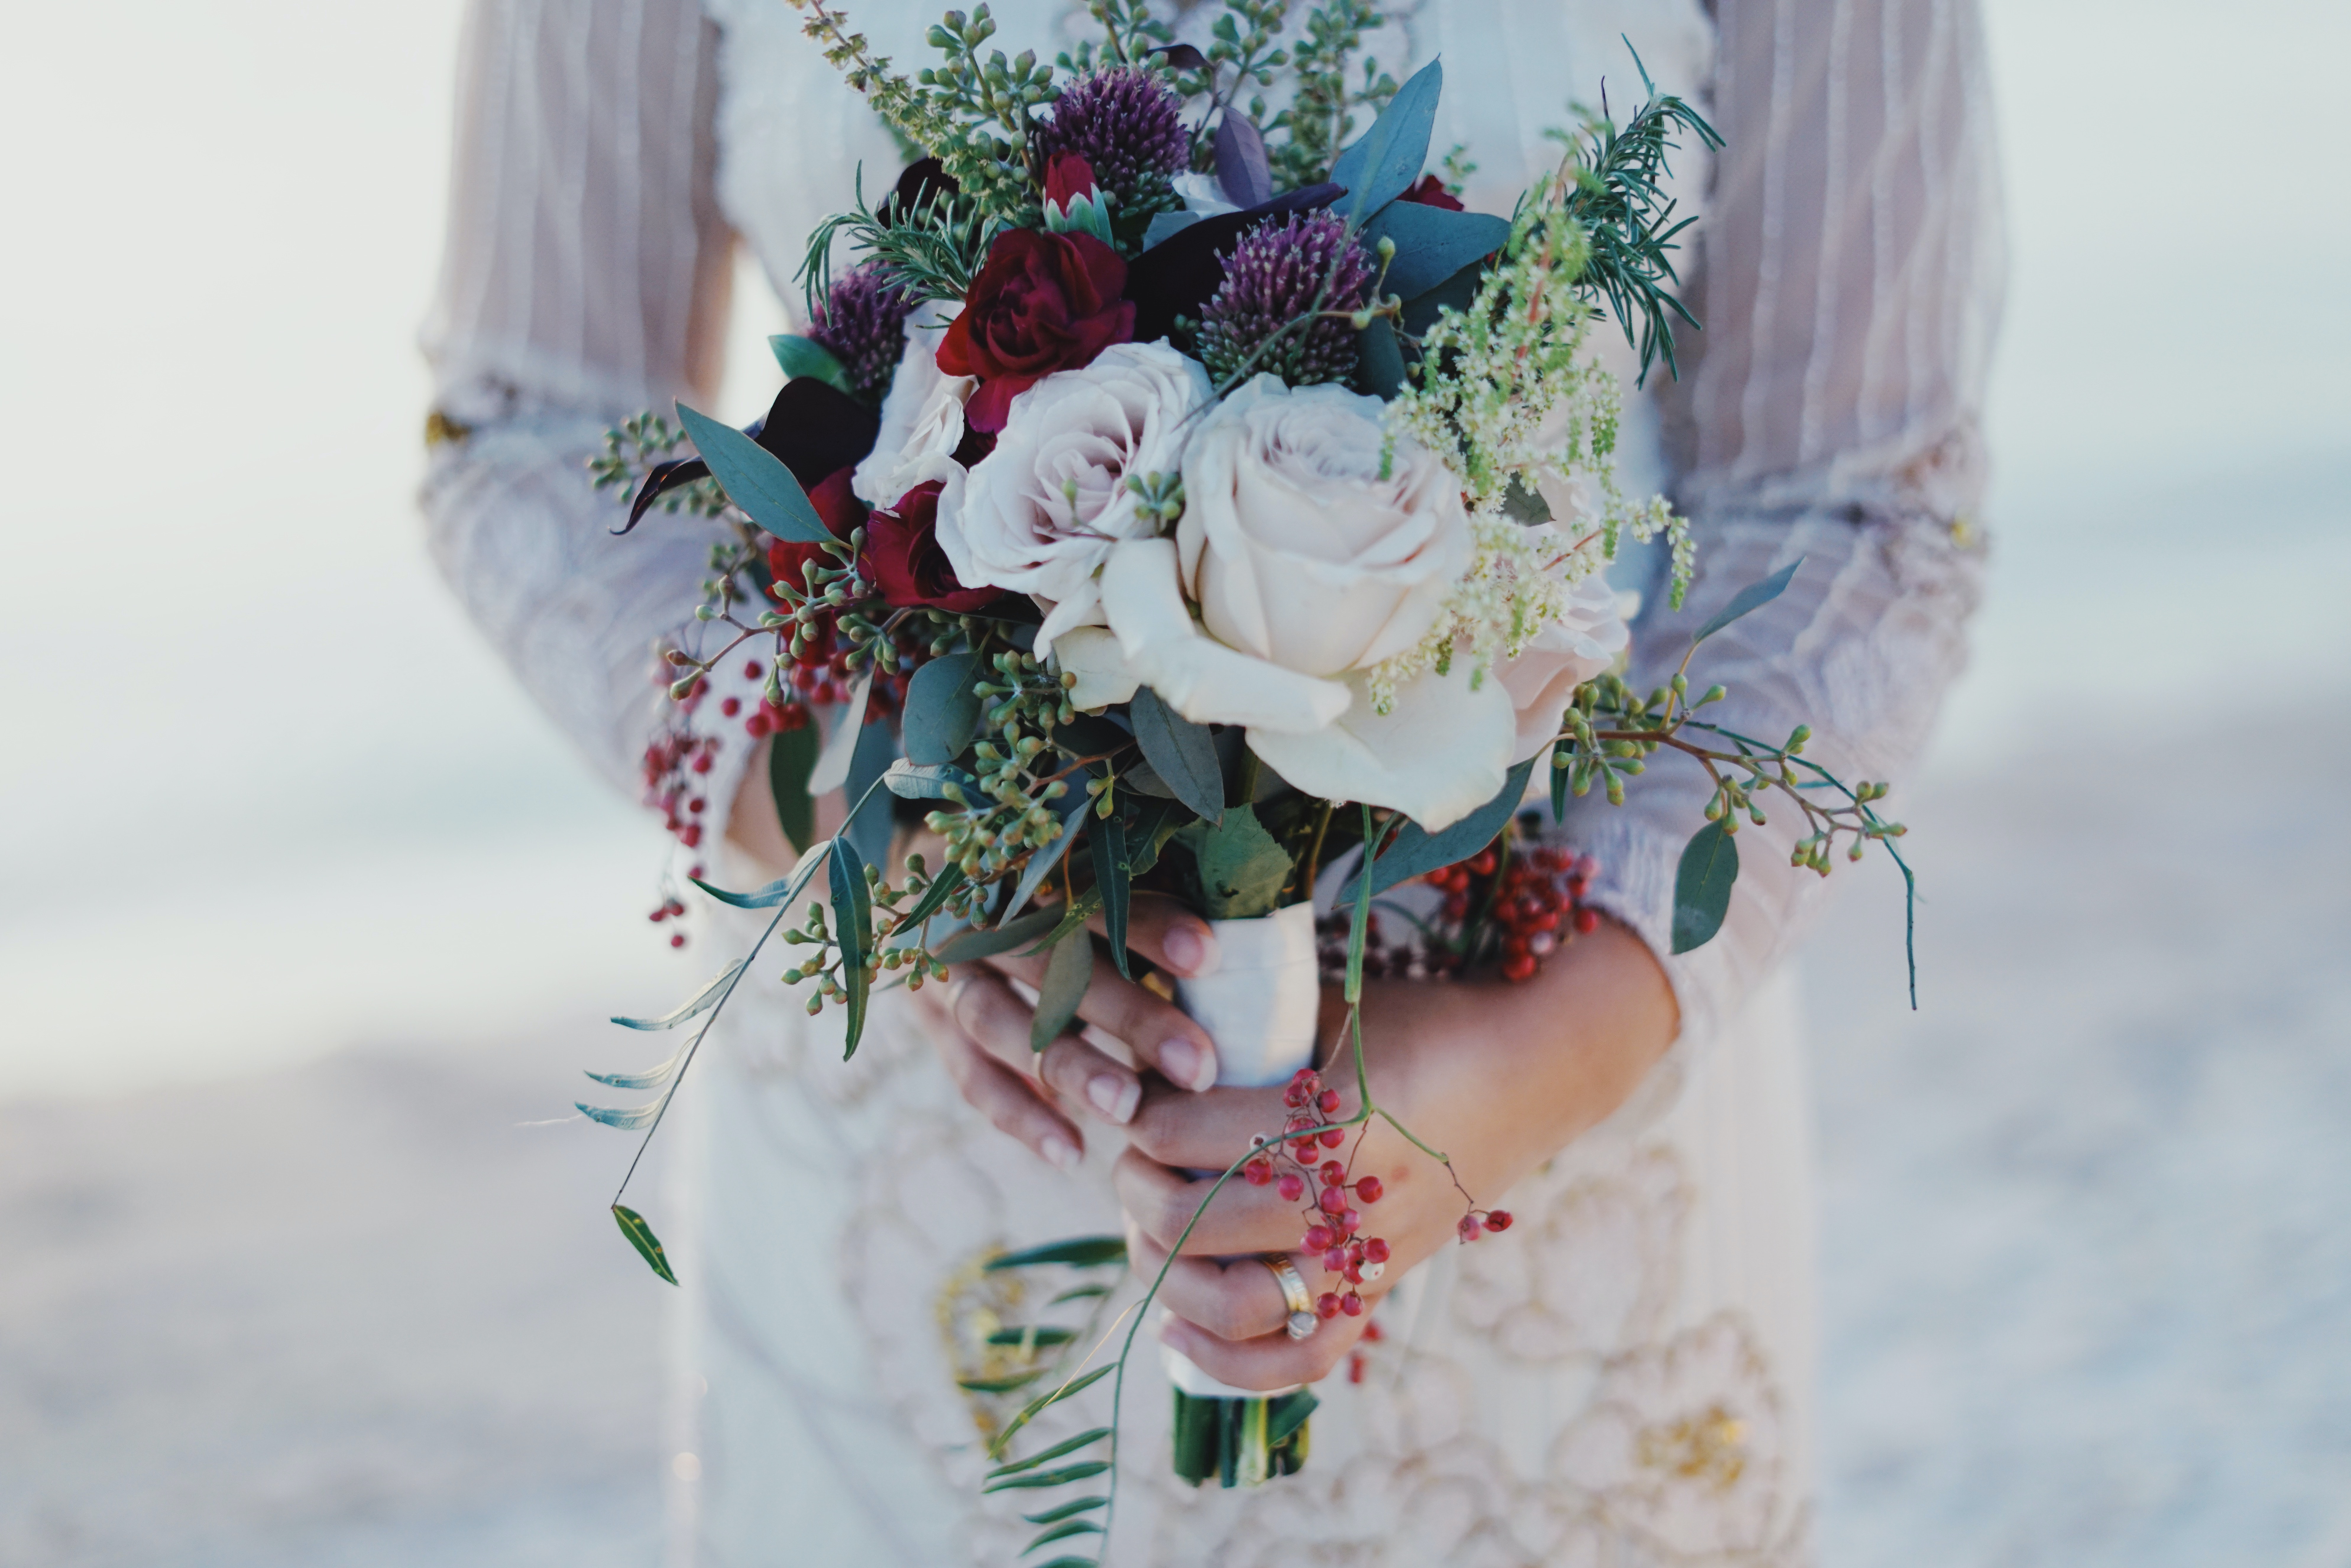 woman-holding-red-and-white-rose-bouquet-759668